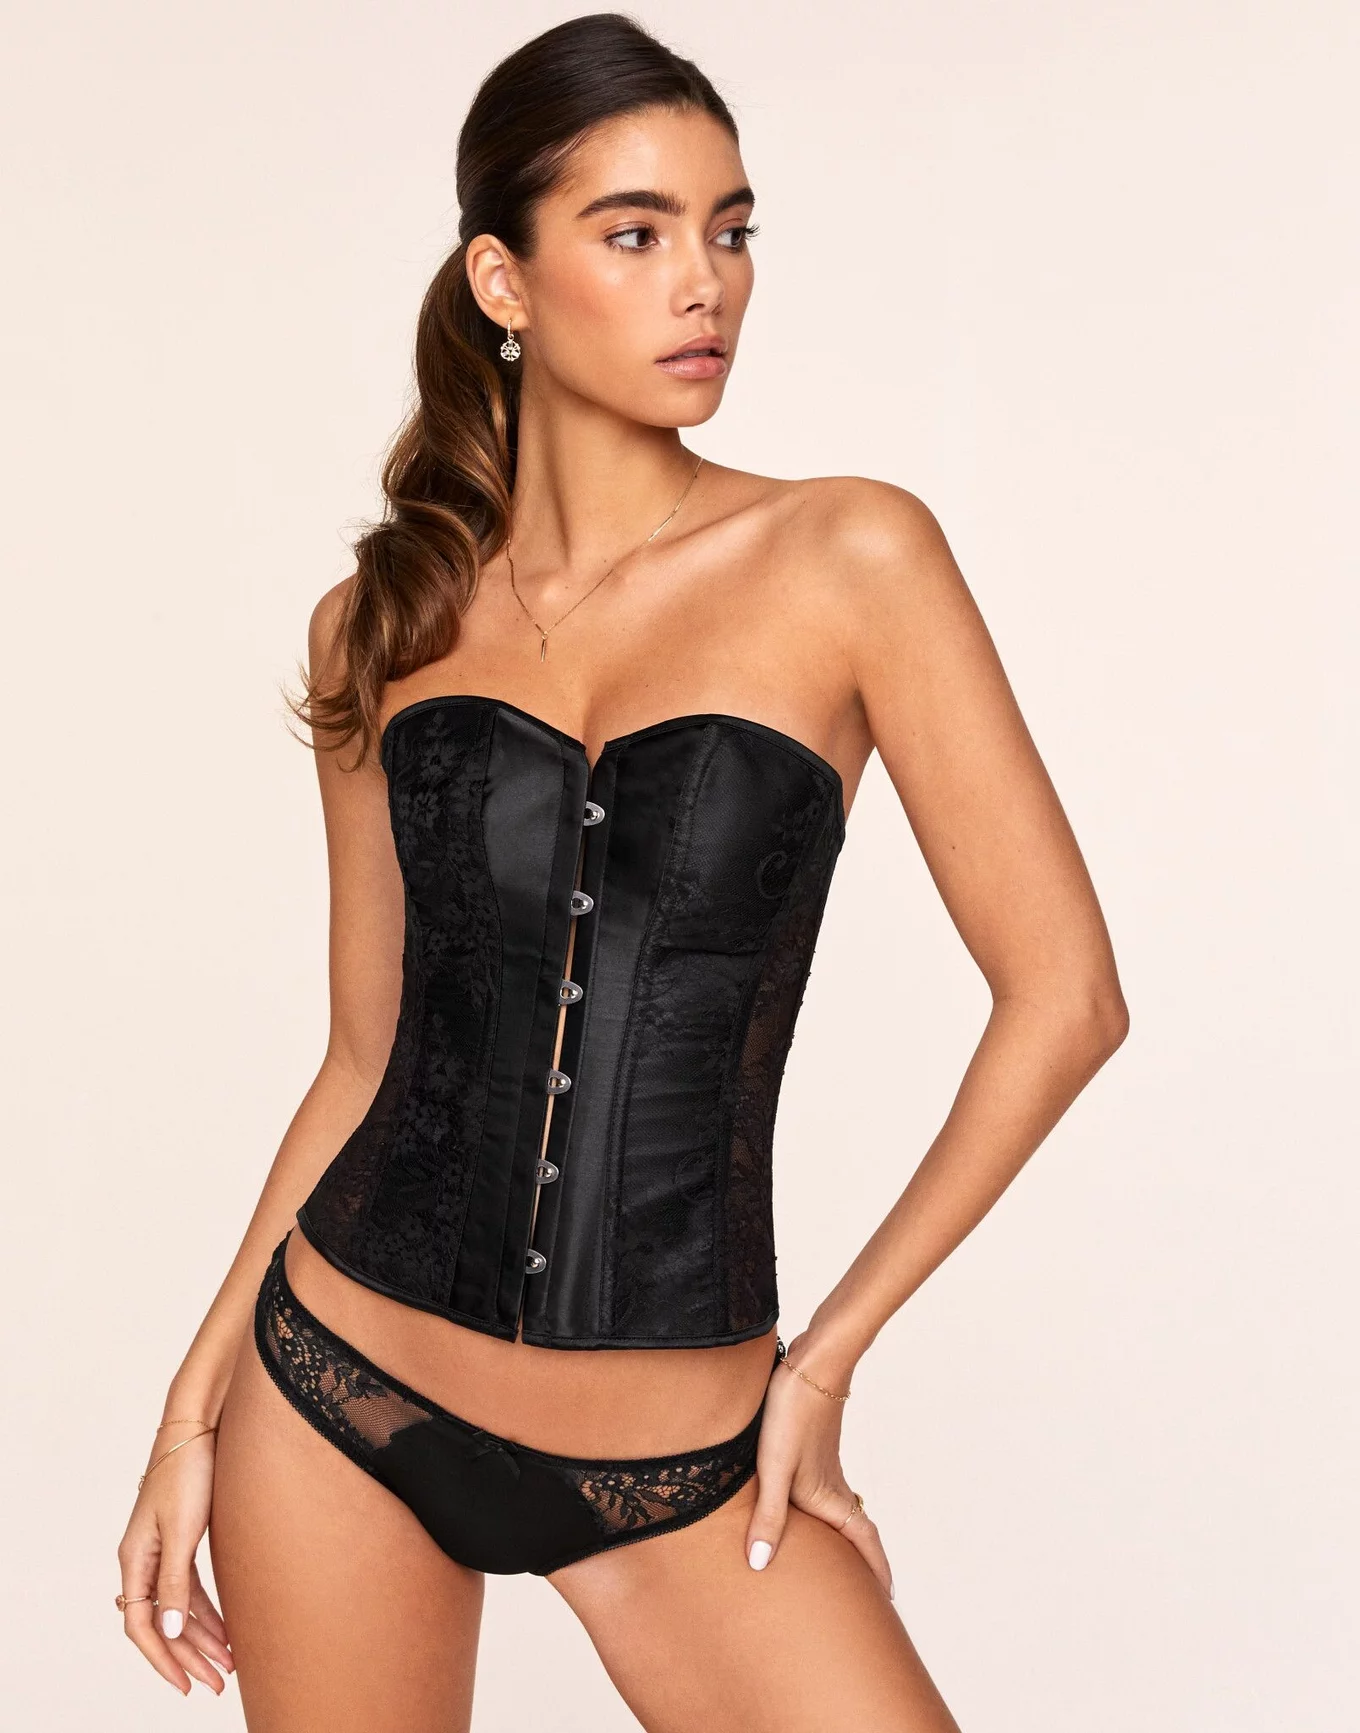 Adore Me black corset top Size L - $30 (25% Off Retail) - From keisha